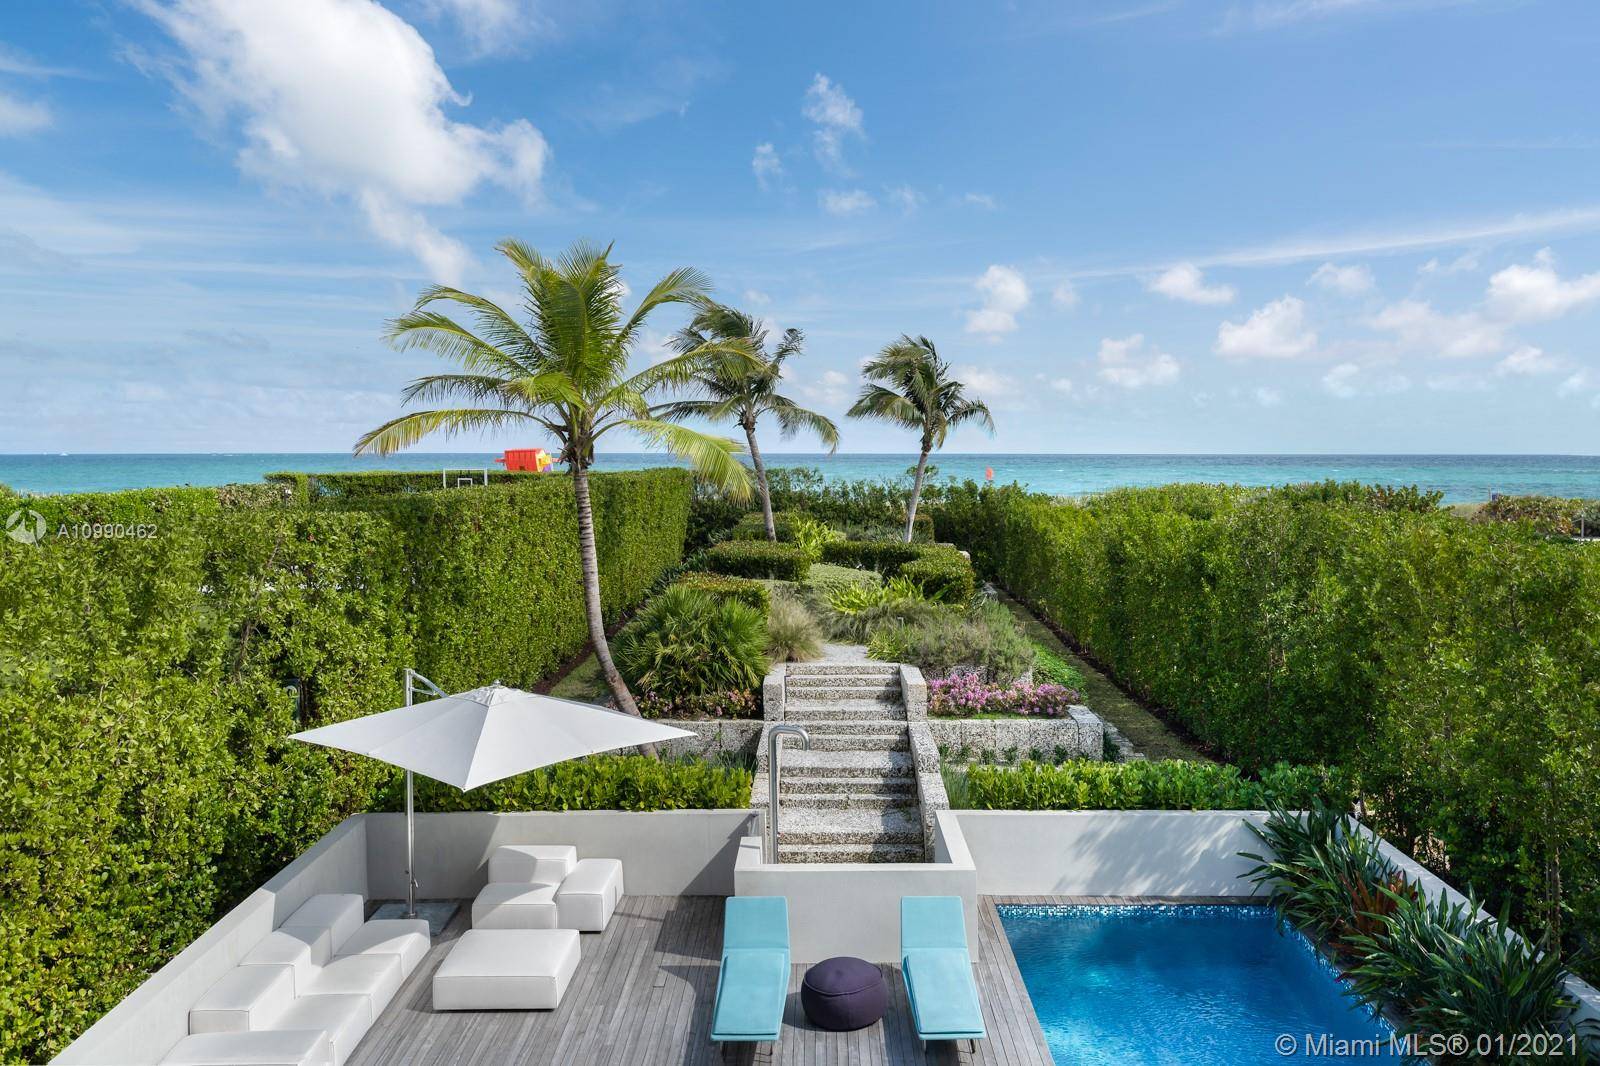 An architectural masterpiece in Miami Beach s only private oceanfront residential enclave.